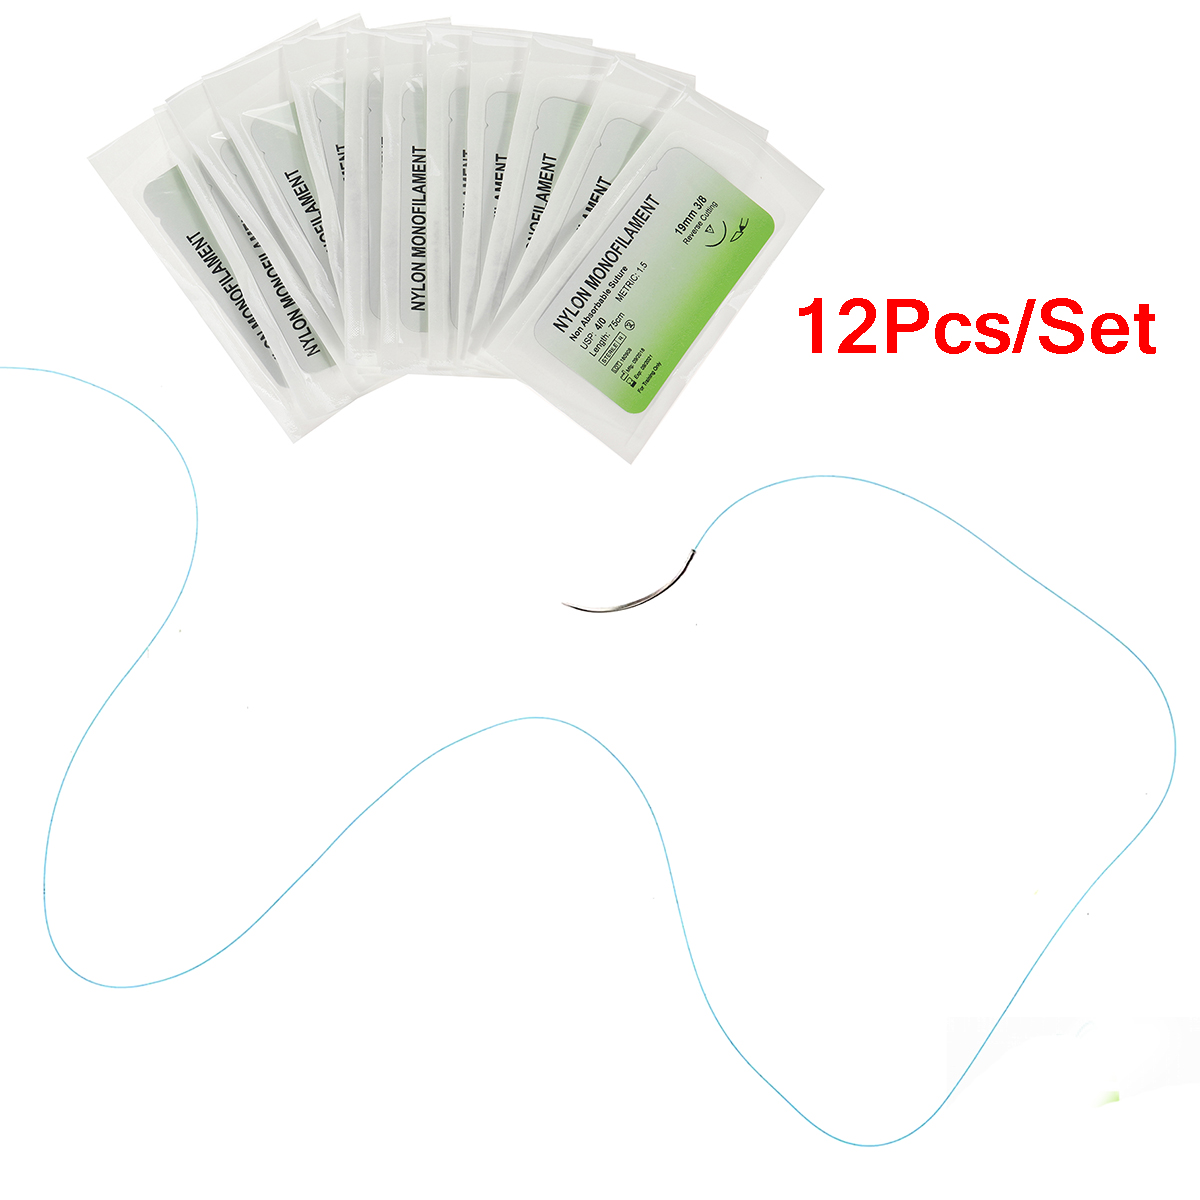 25 In 1 Medical Skin Suture Surgical Training Kit Silicone Pad Needle Scissors 16